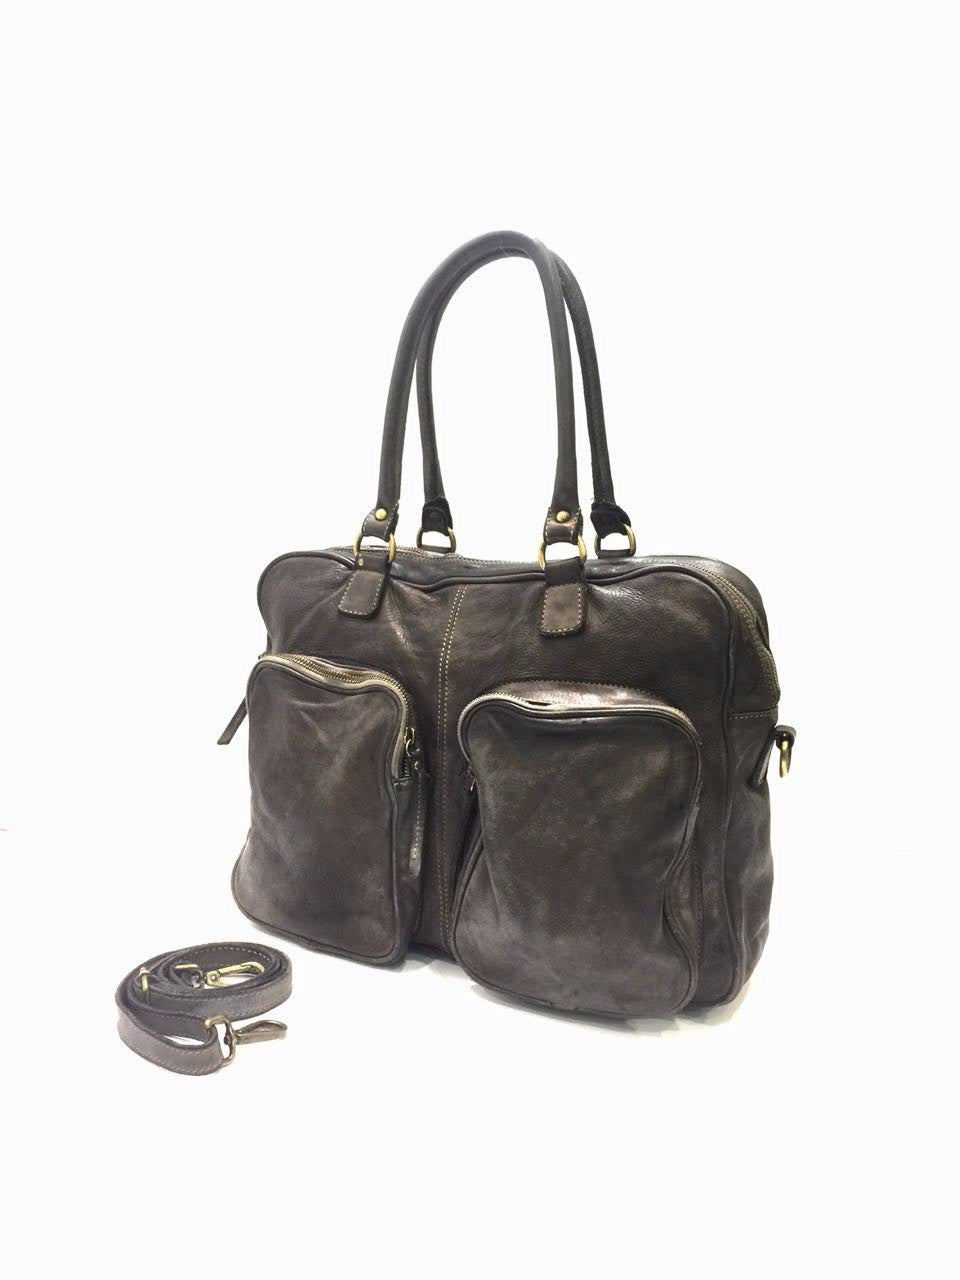 MAJA - Leather Bag - SOLD OUT